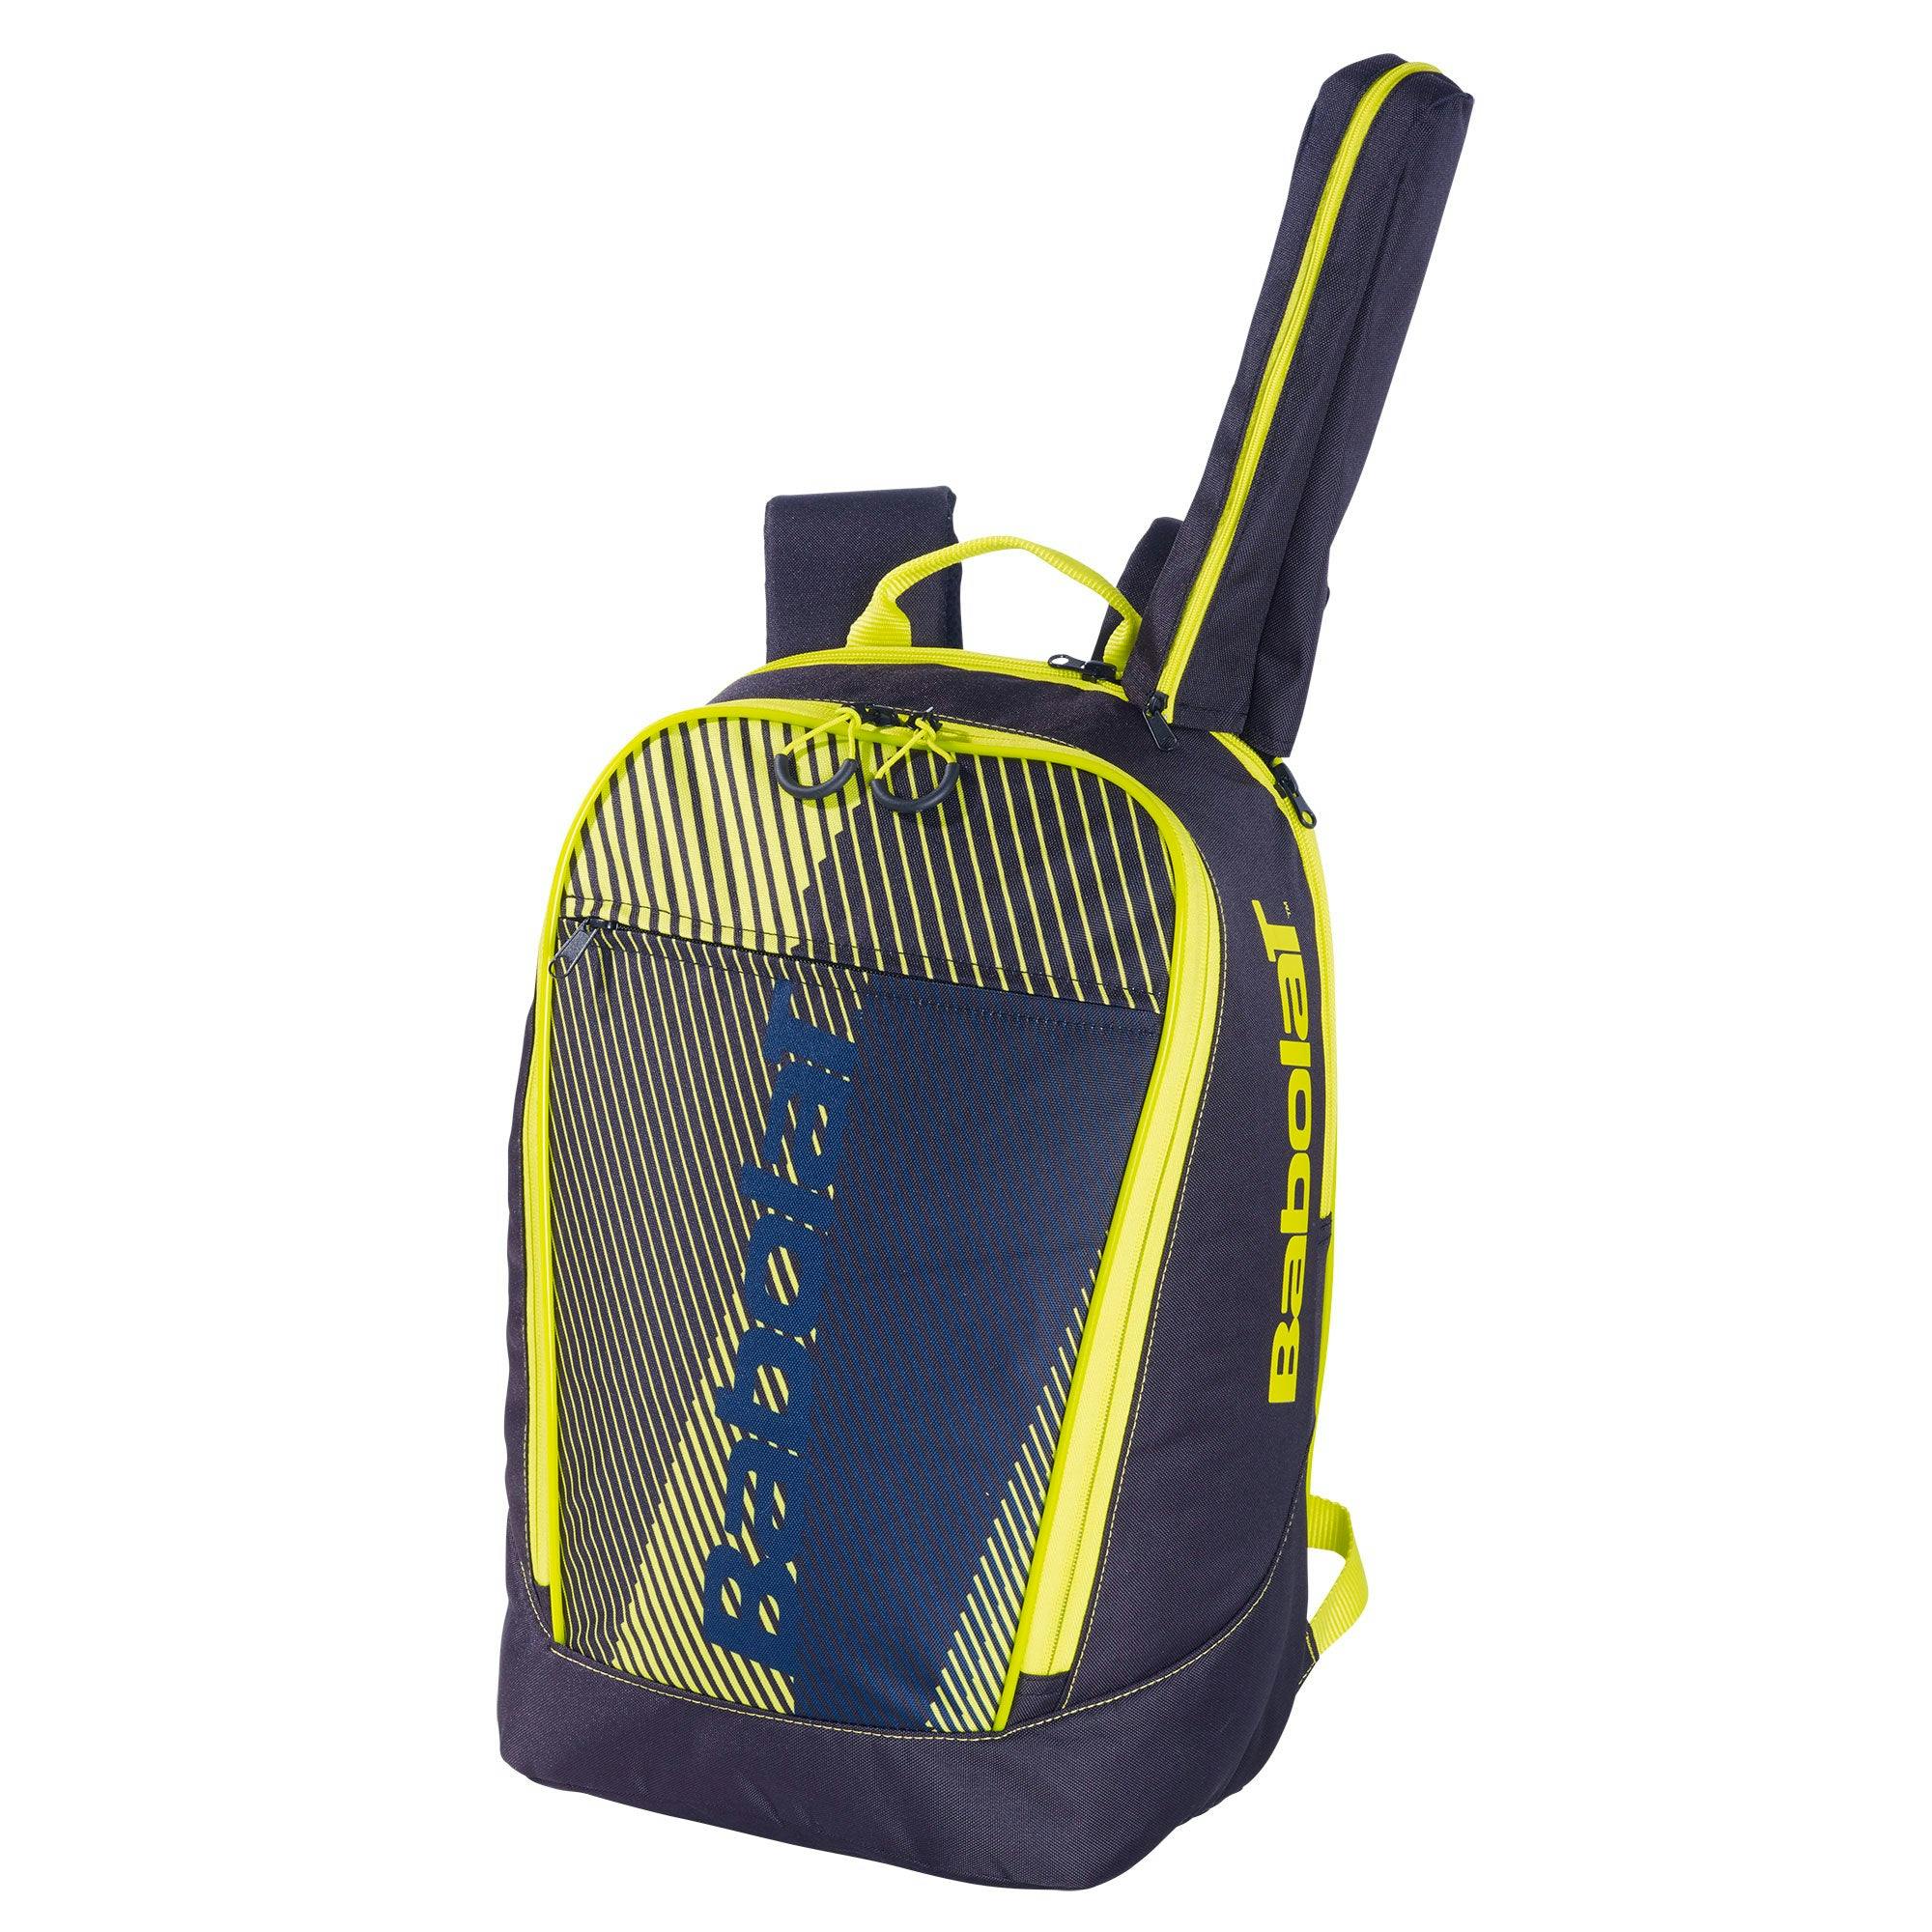 Babolat Classic Club Tennis Backpack